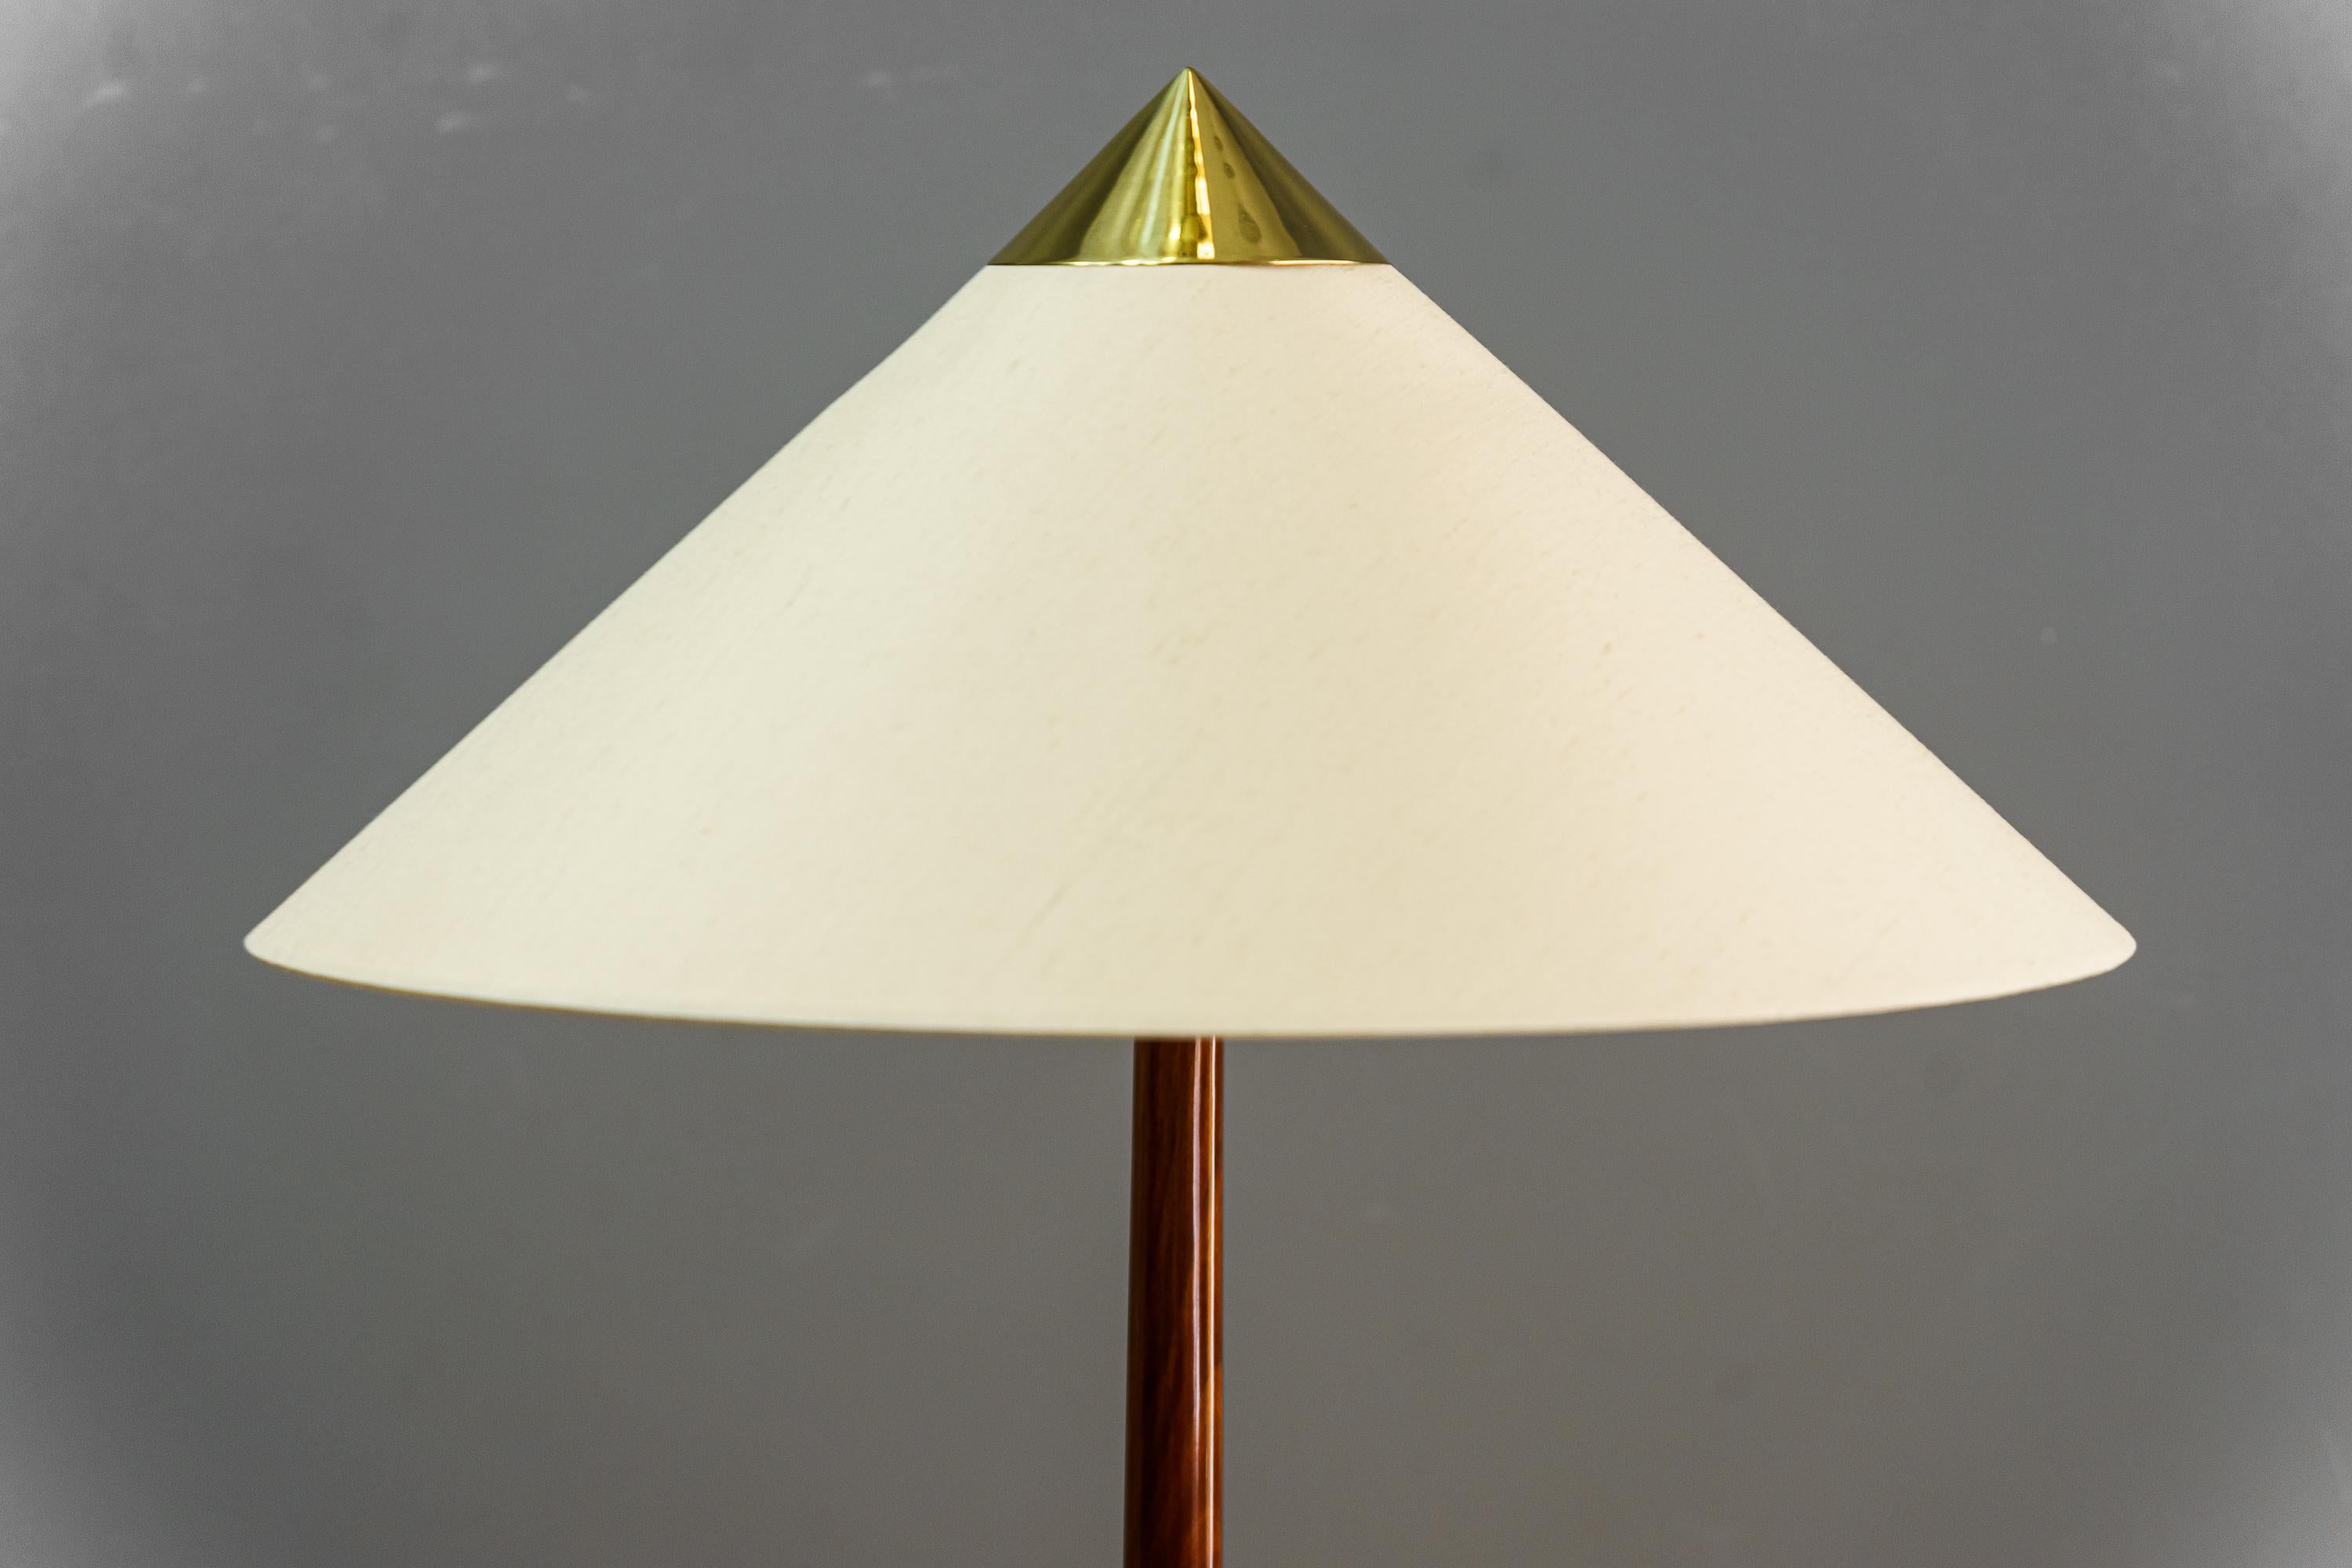 Rare Rupert Nikoll floor lamp vienna around 1950s
Wood polished 
The fabric shade is replaced ( new )